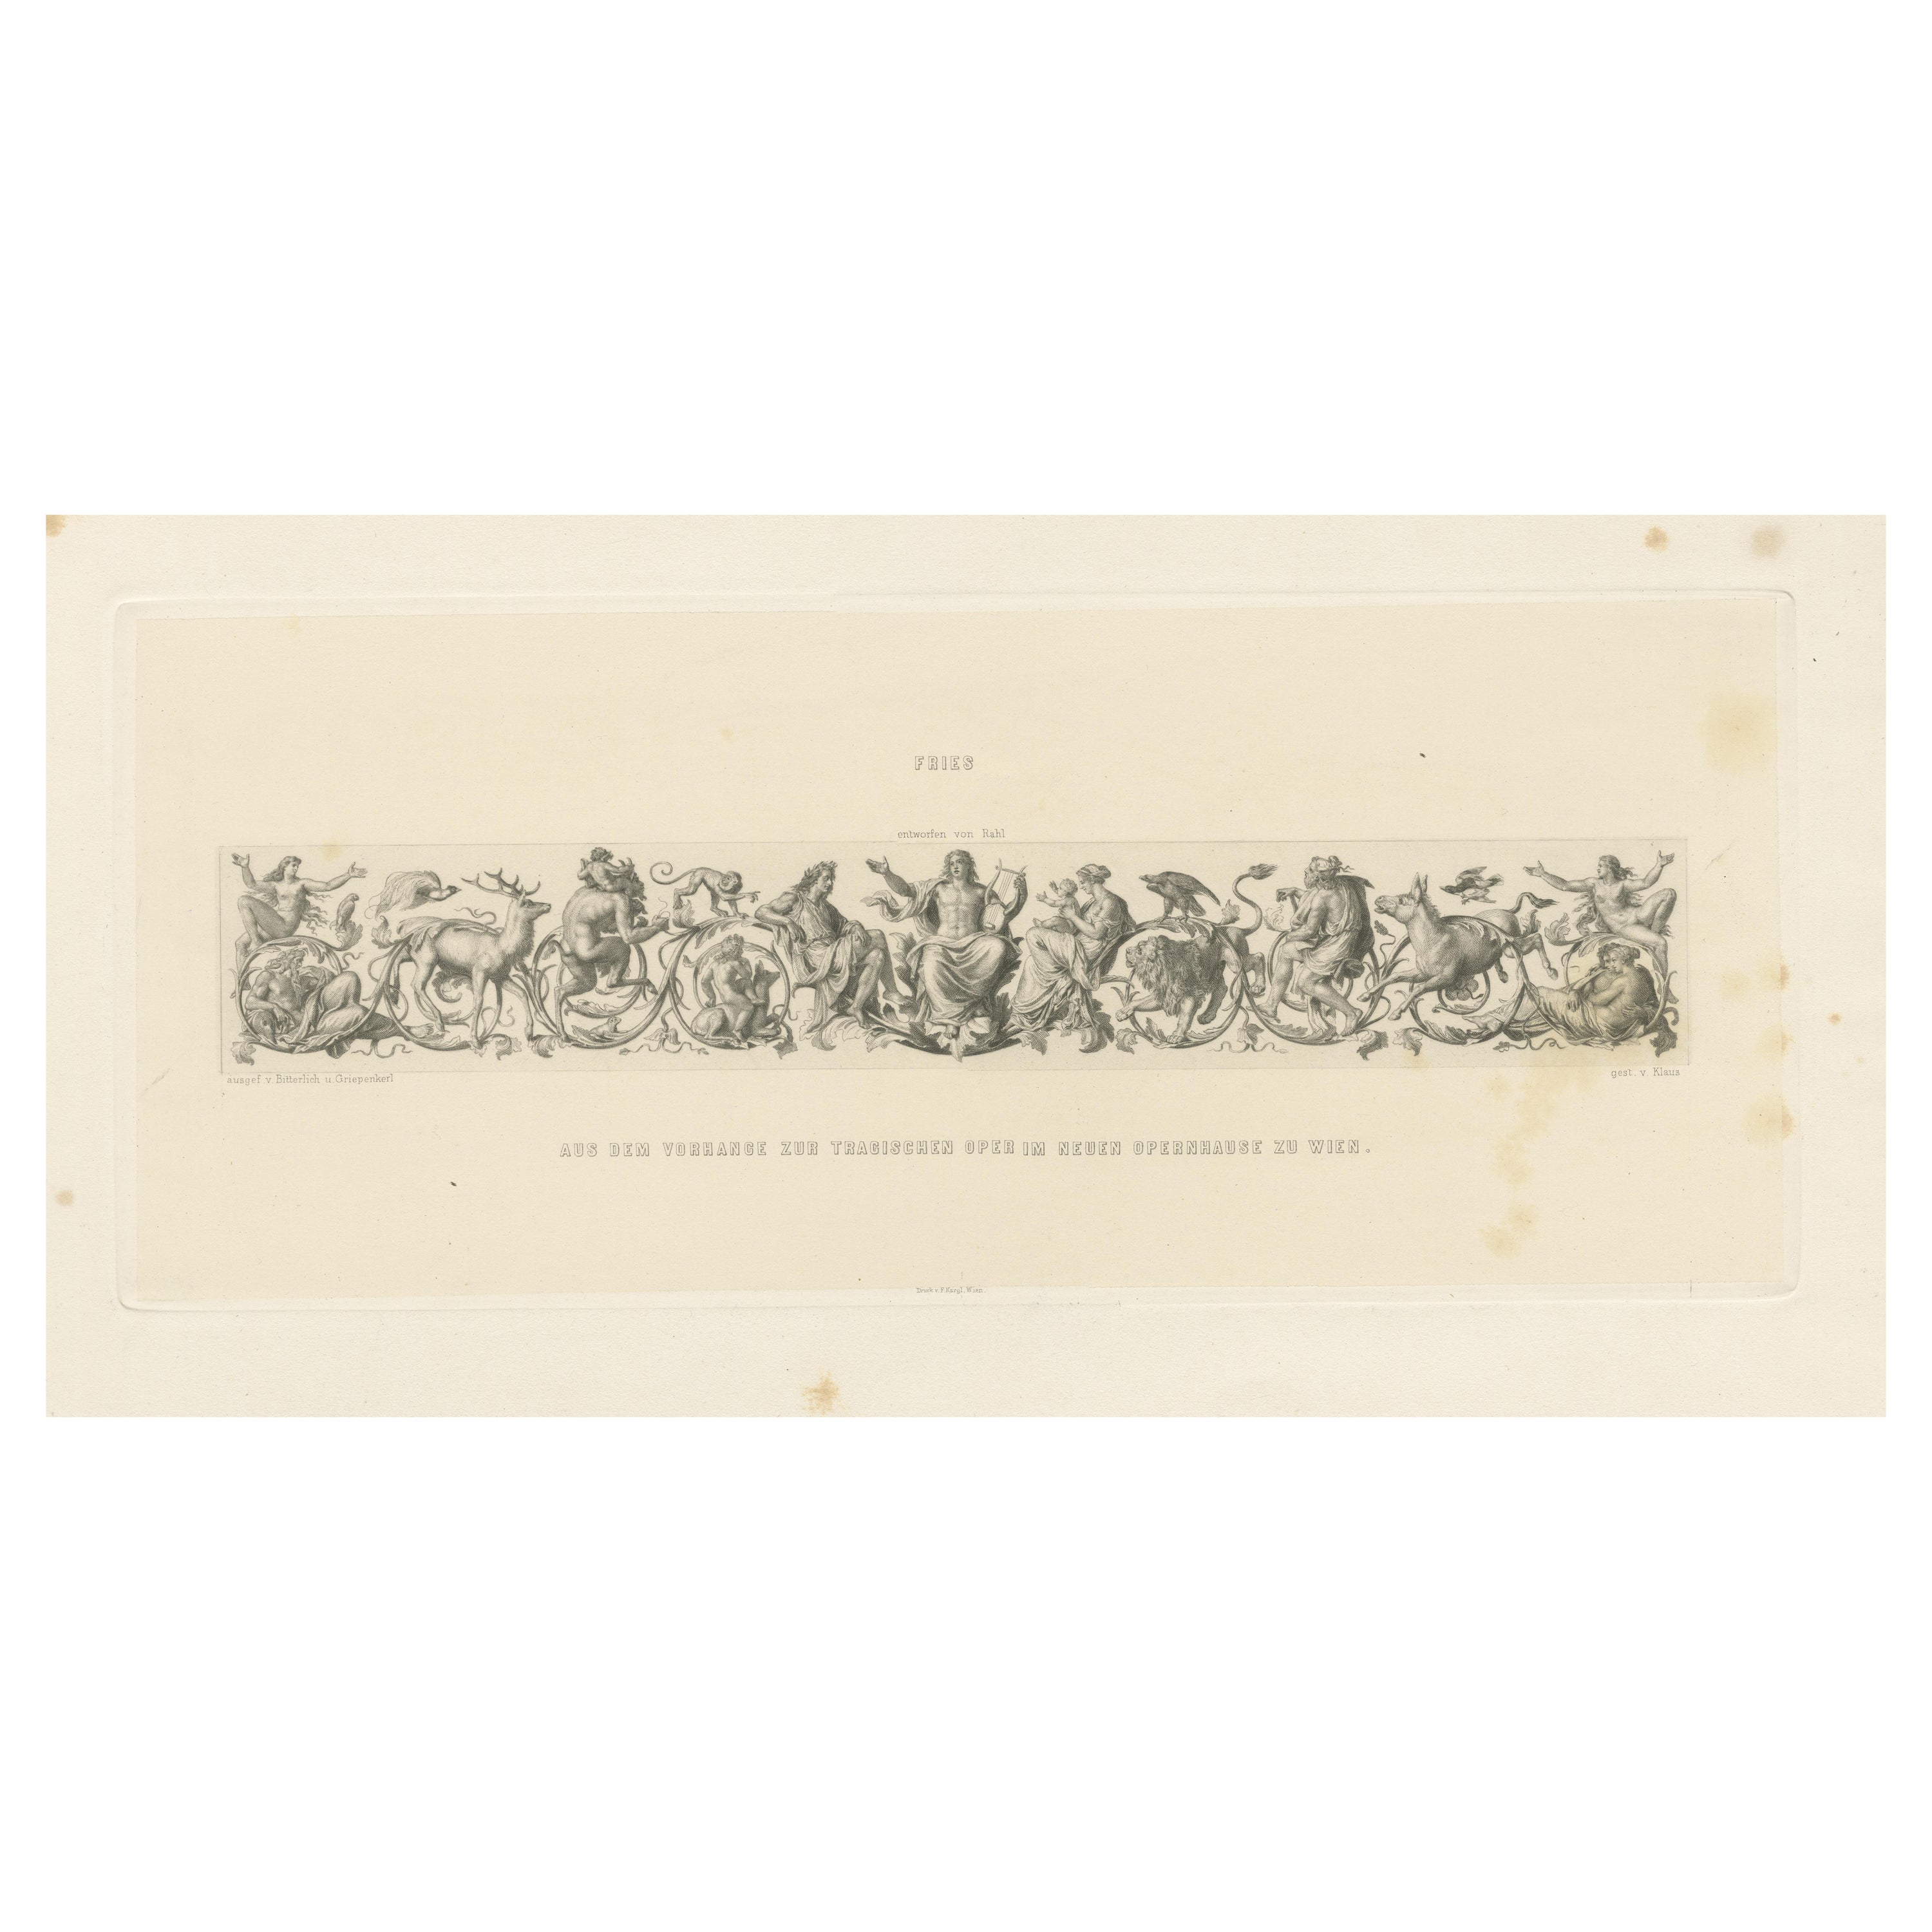 Antique Print 'Frieze' of the Curtain in the New Opera House in Vienna